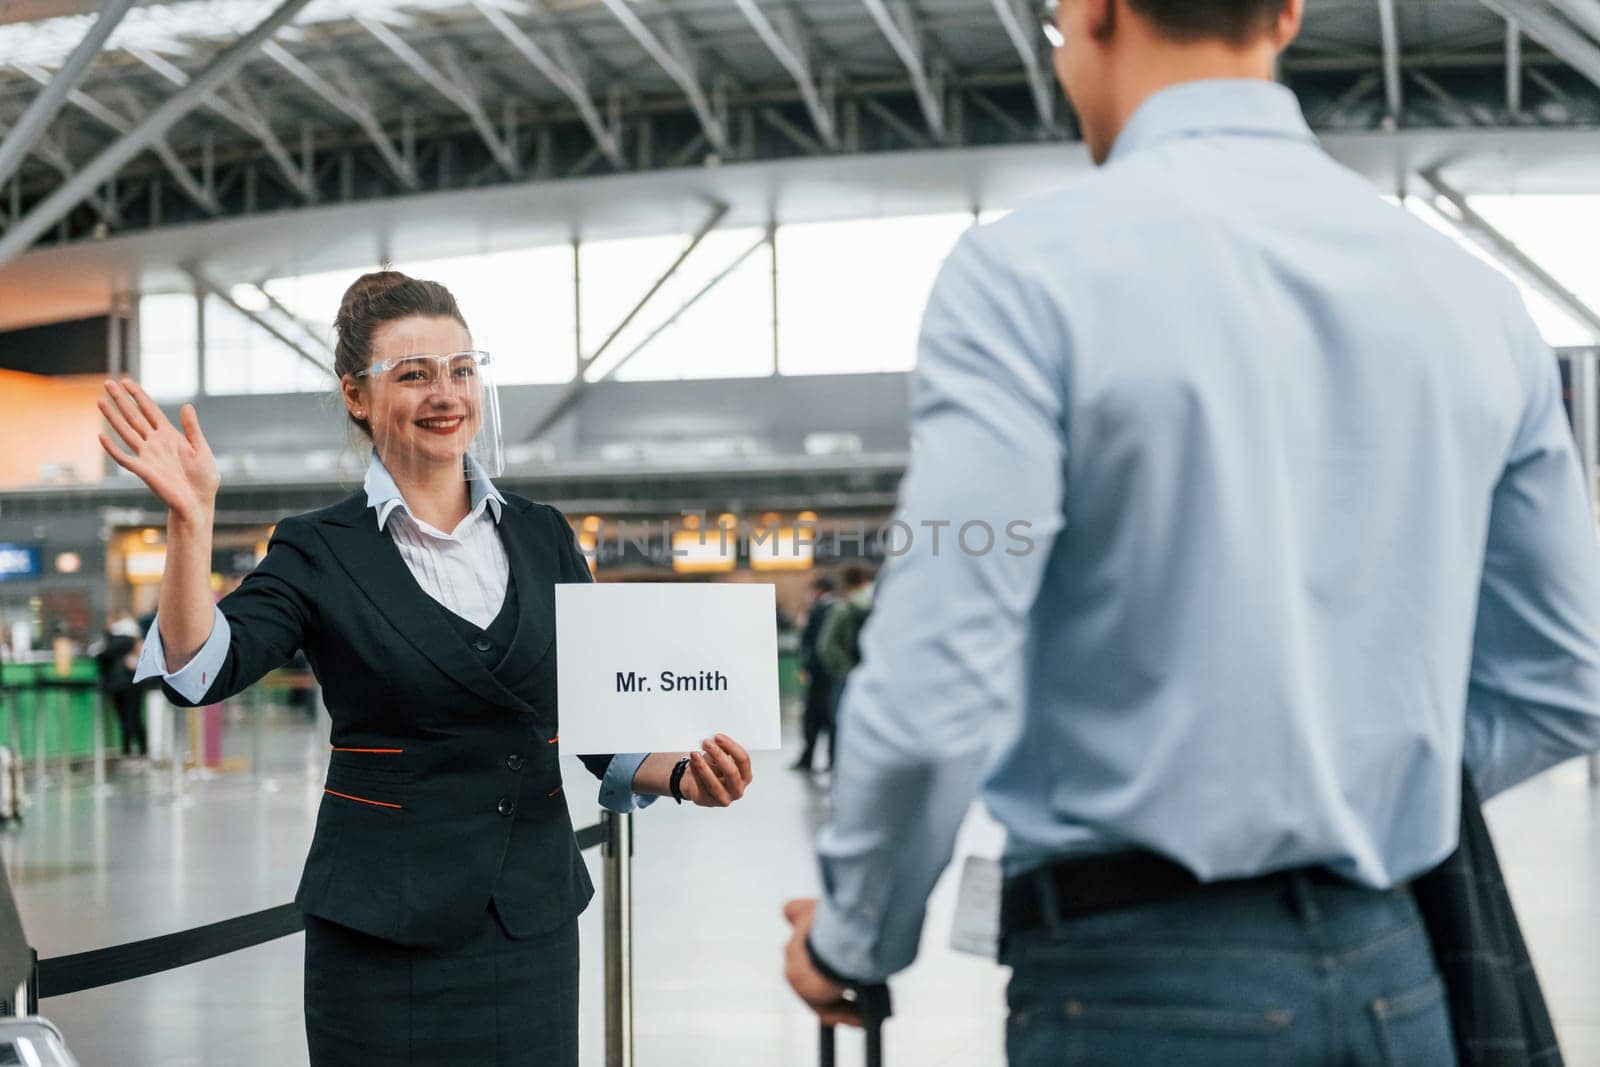 Meet by the woman with text. Young businessman in formal clothes is in the airport at daytime by Standret